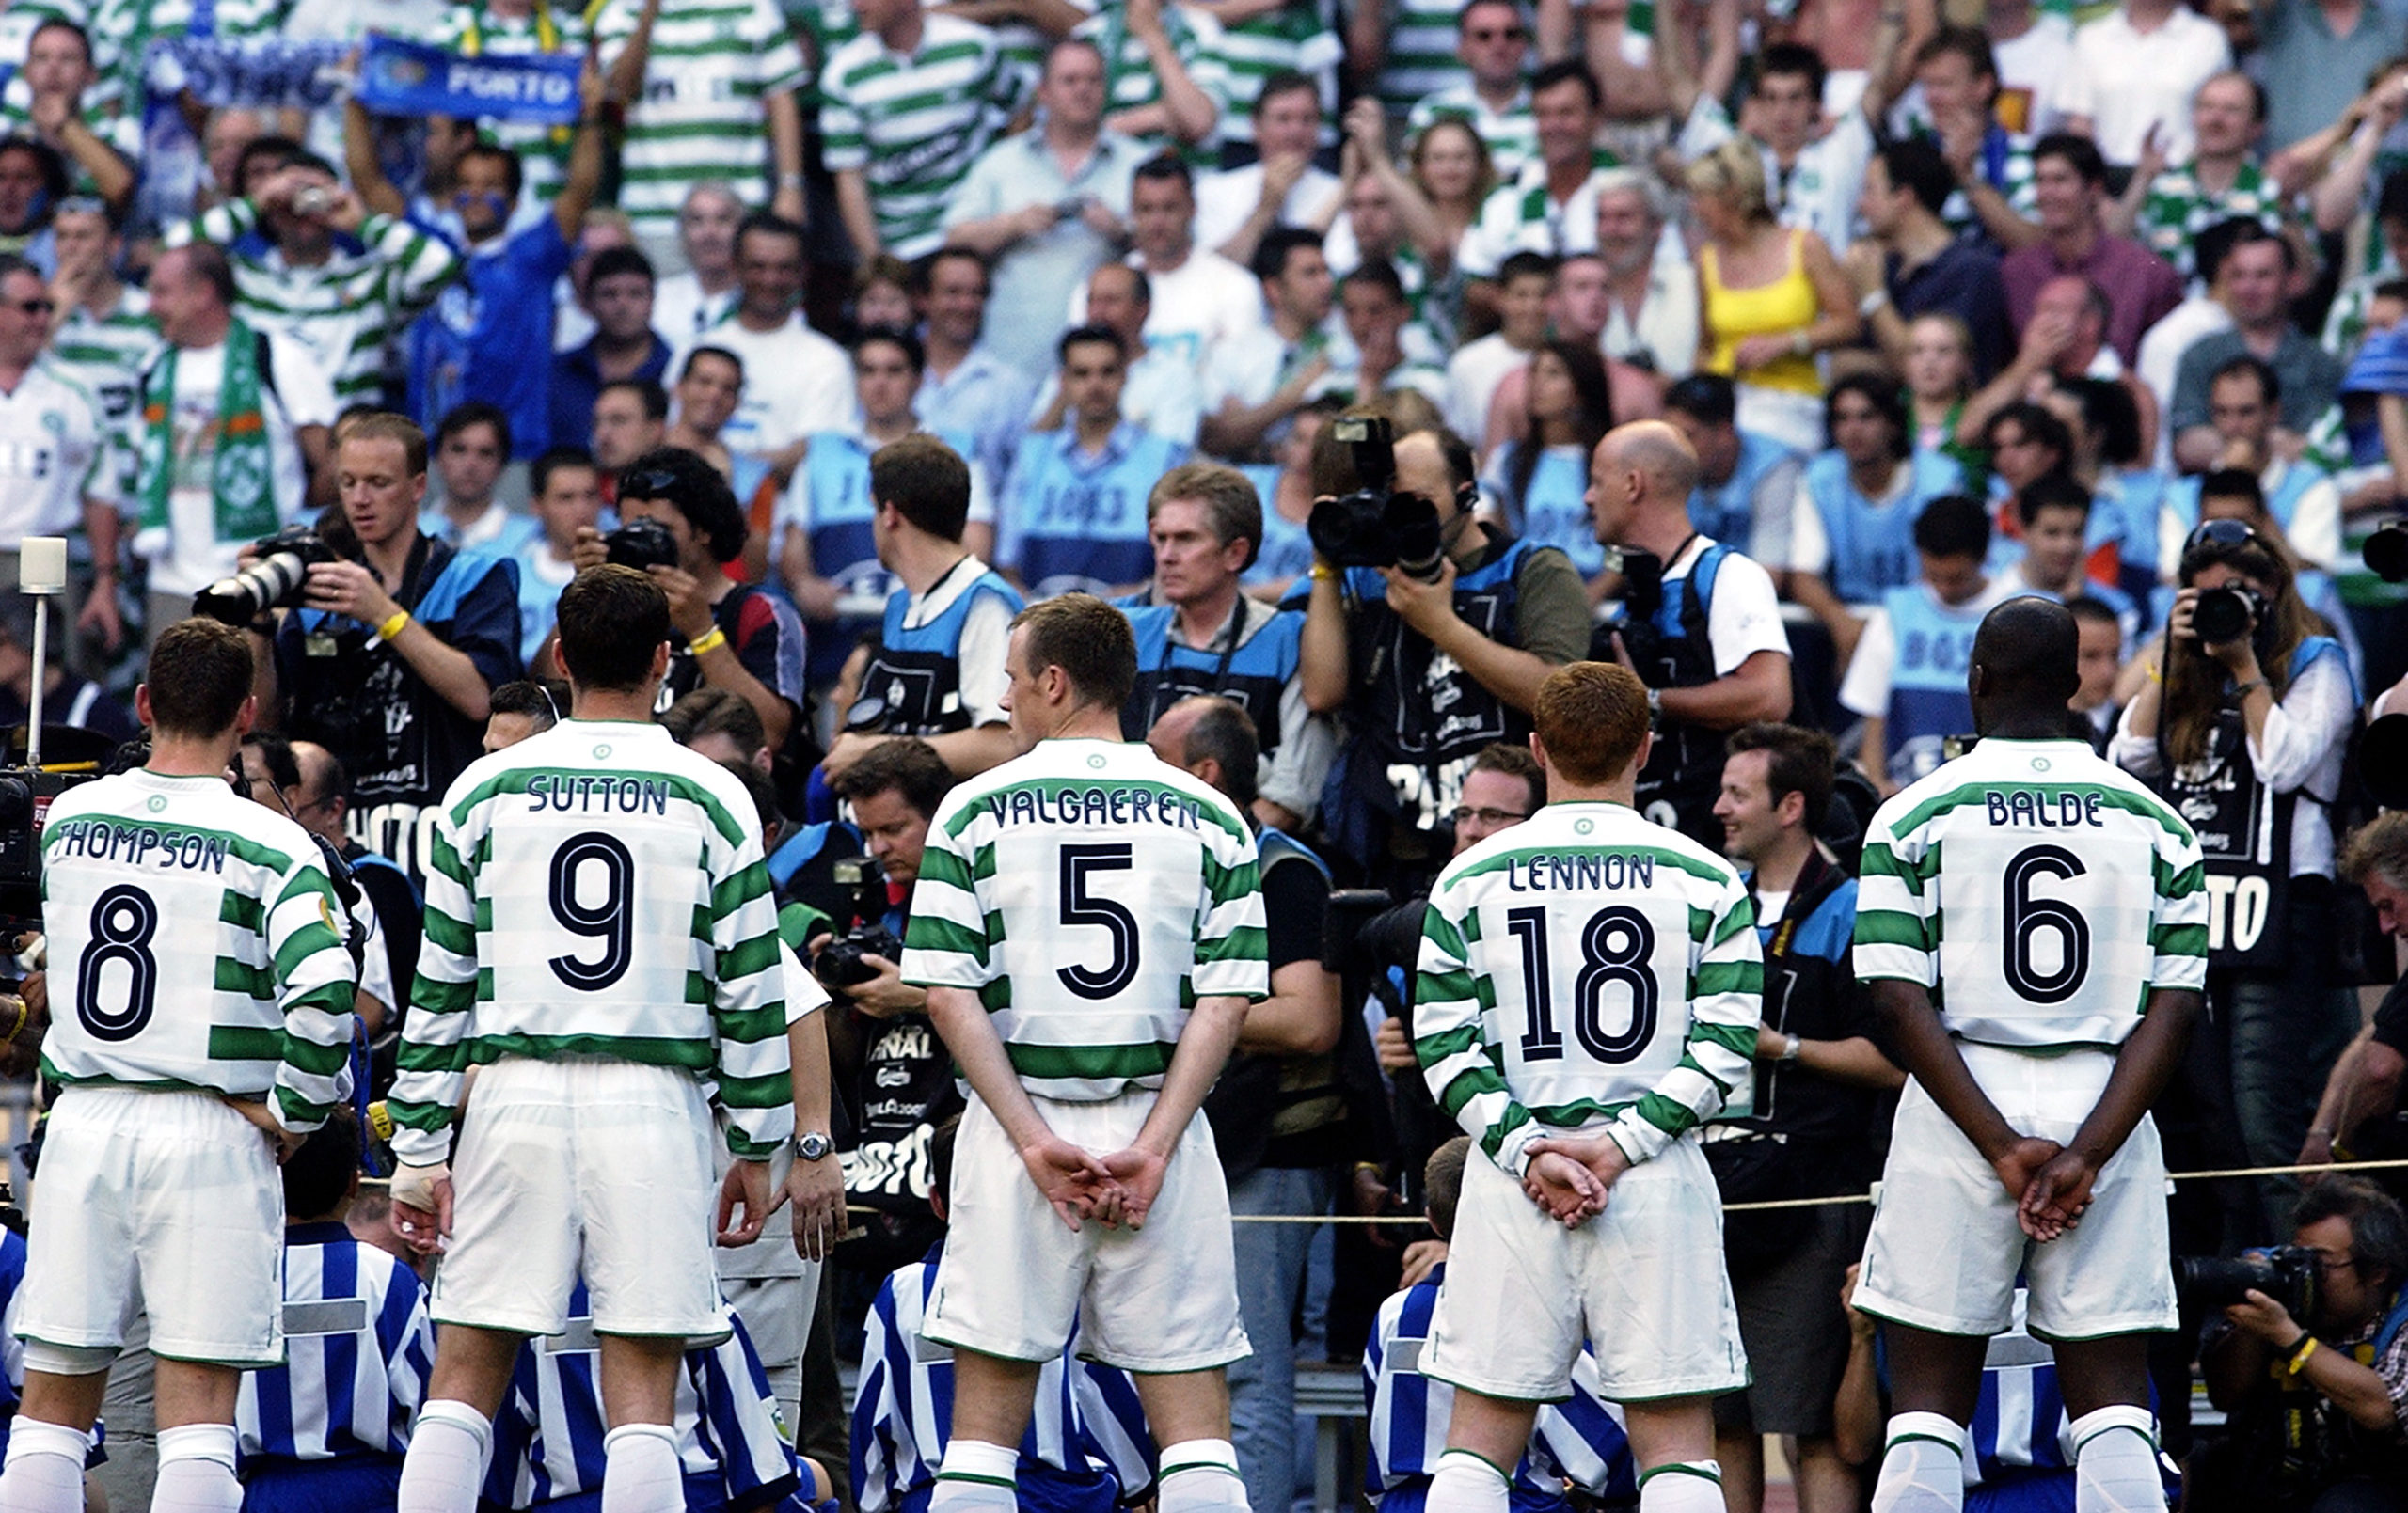 "We won't let you down"; Celtic remind supporters of Seville on 18-year anniversary